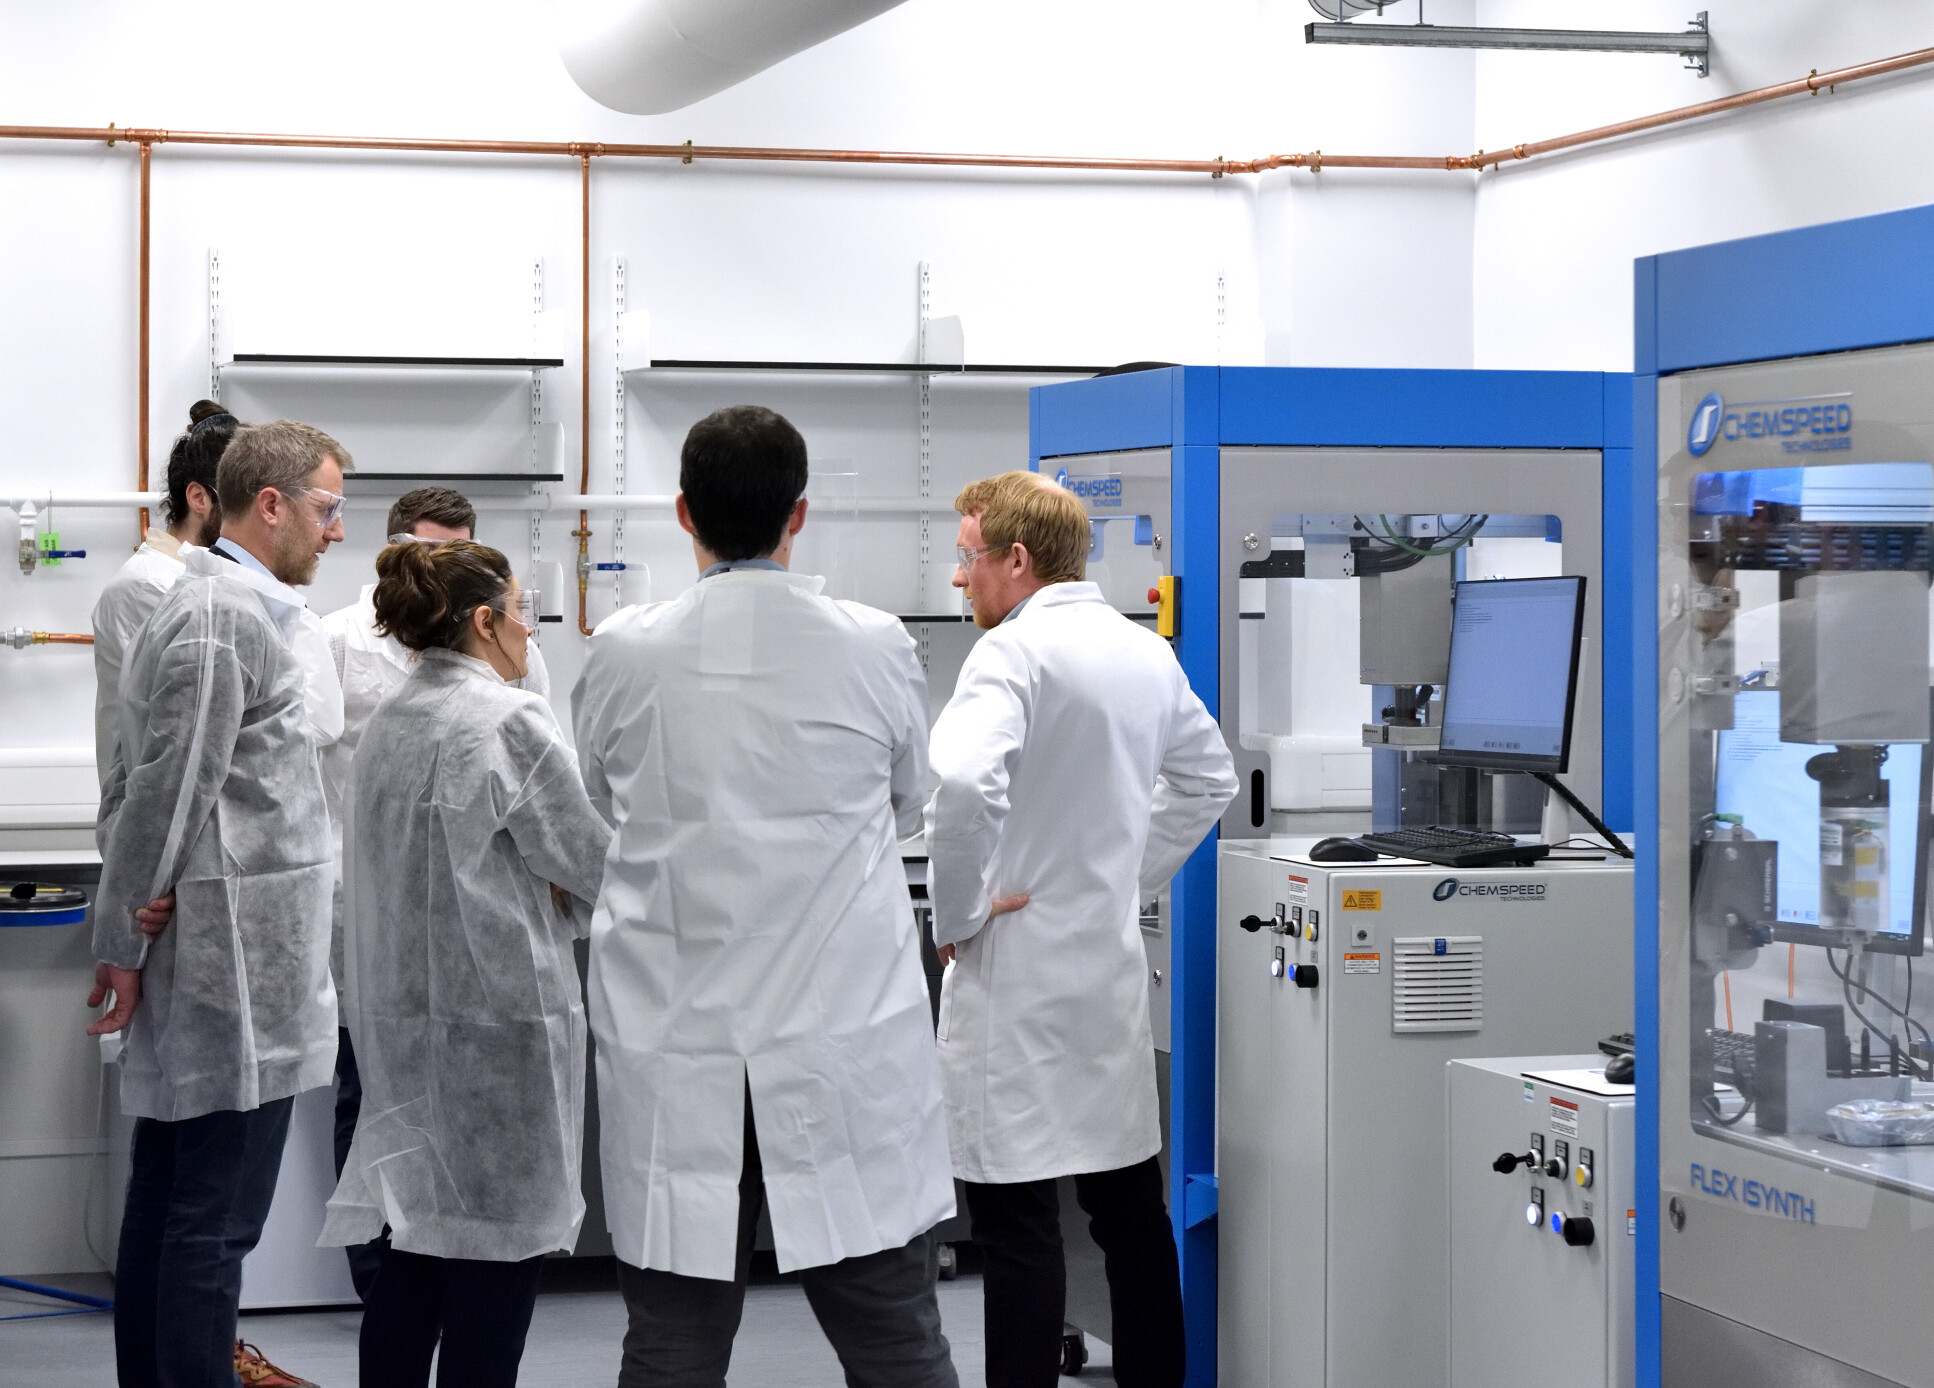 A group of men and women in labs coats in a lab setting